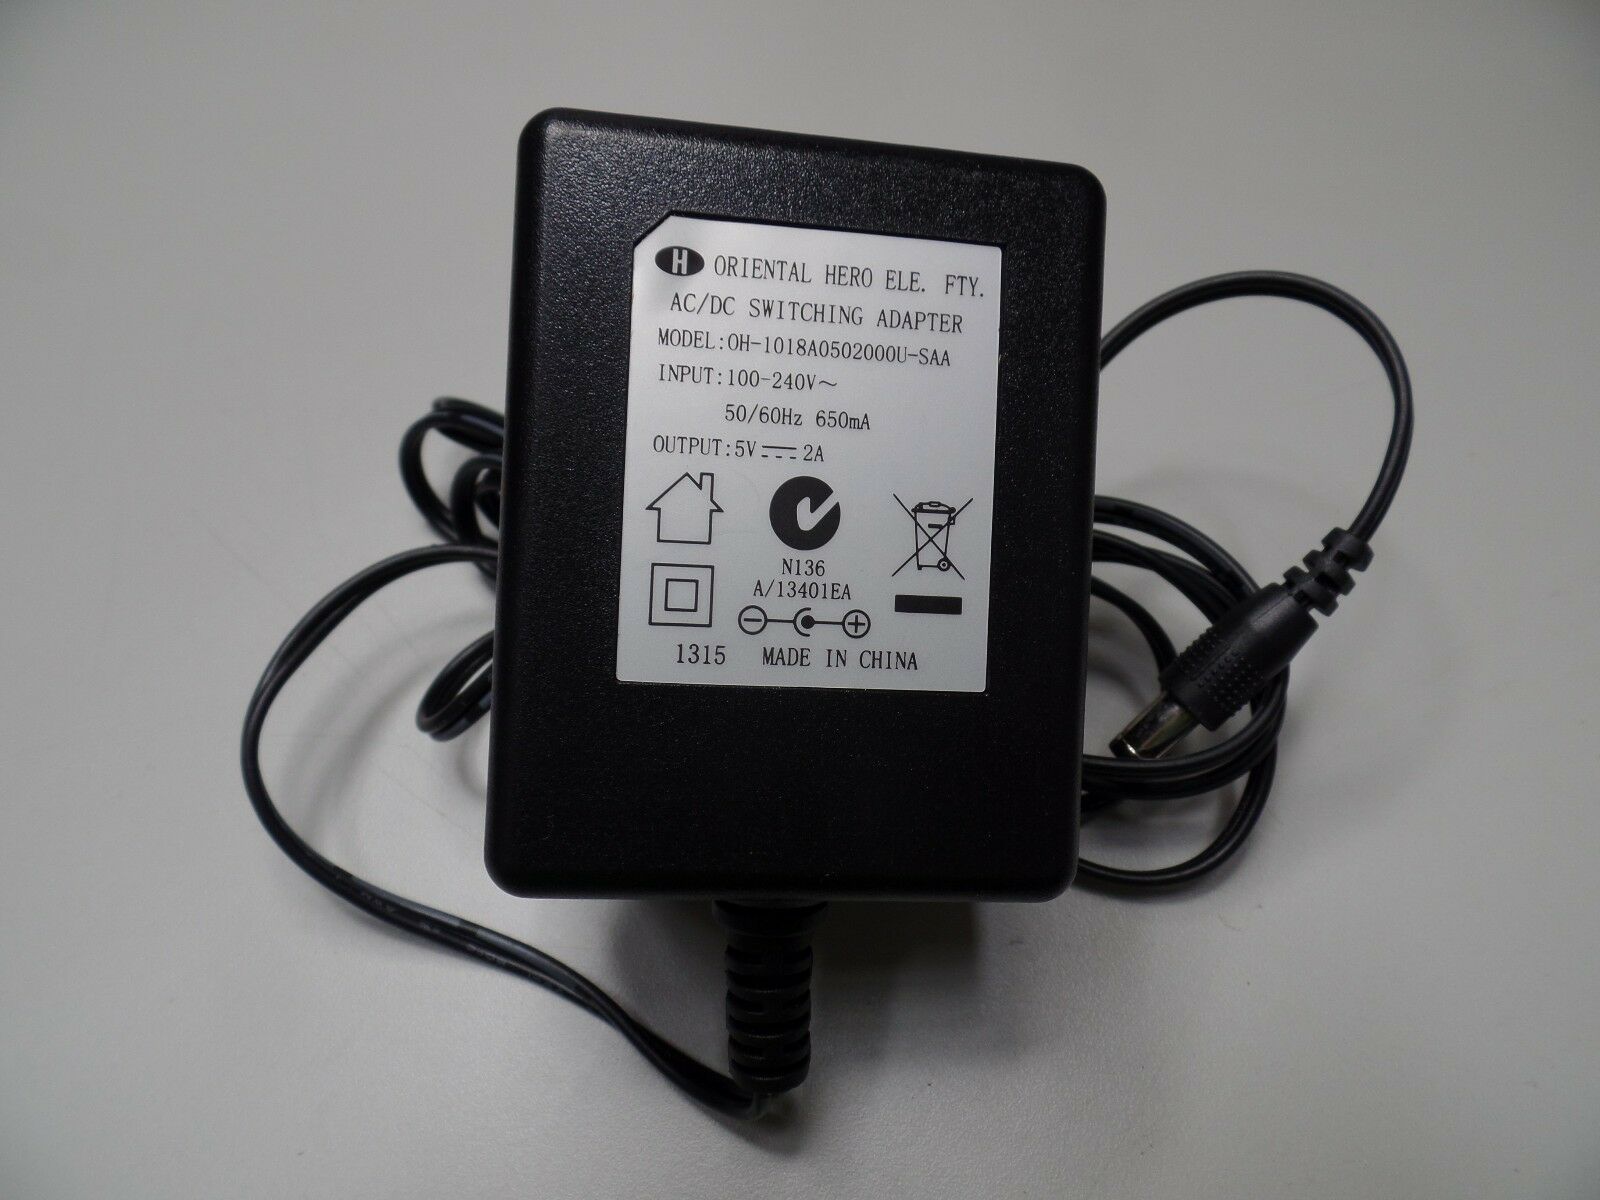 Oriental Hero AC/DC Switching Power Adapter OH-1018A0502000U-SAA 5V 2A Specification: Manufacturer: Oriental Hero Mode